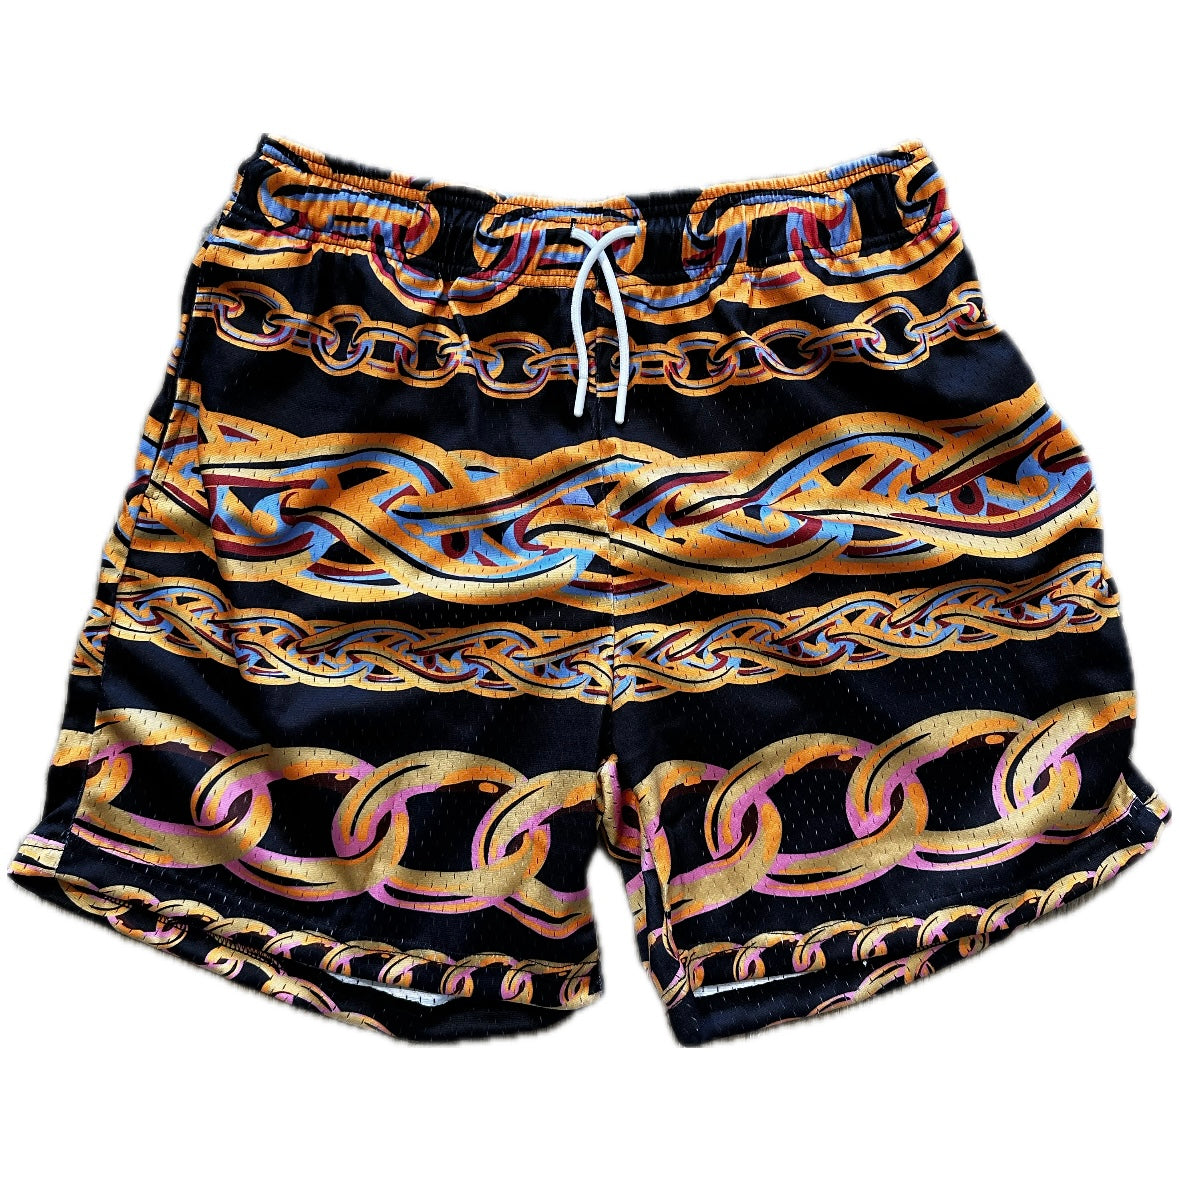 The Edition “Gold Chain” Shorts